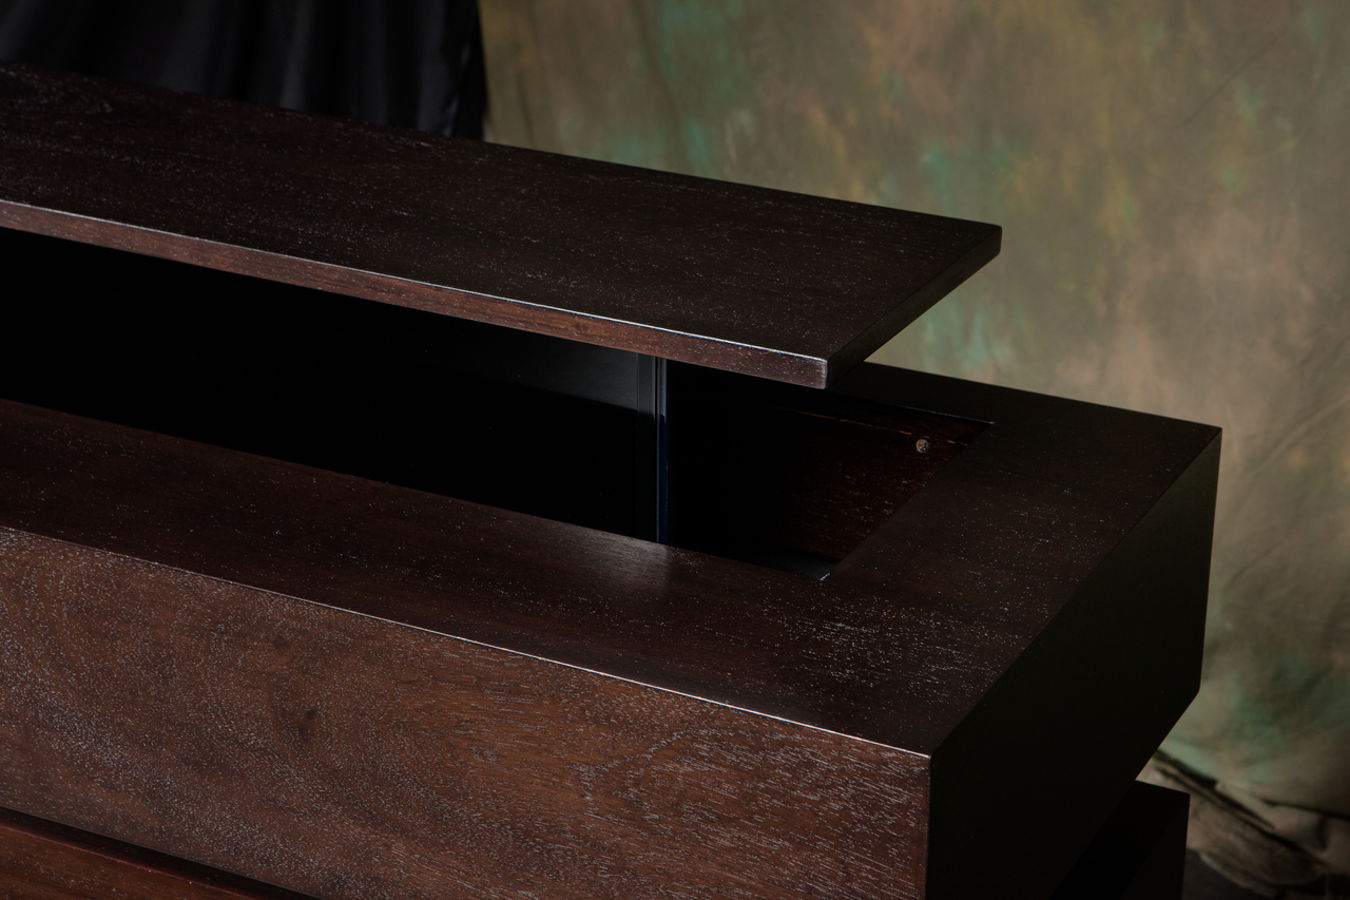 Here is a close up of the Le Bloc. You can see the open pour espresso finish on the mahogany wood